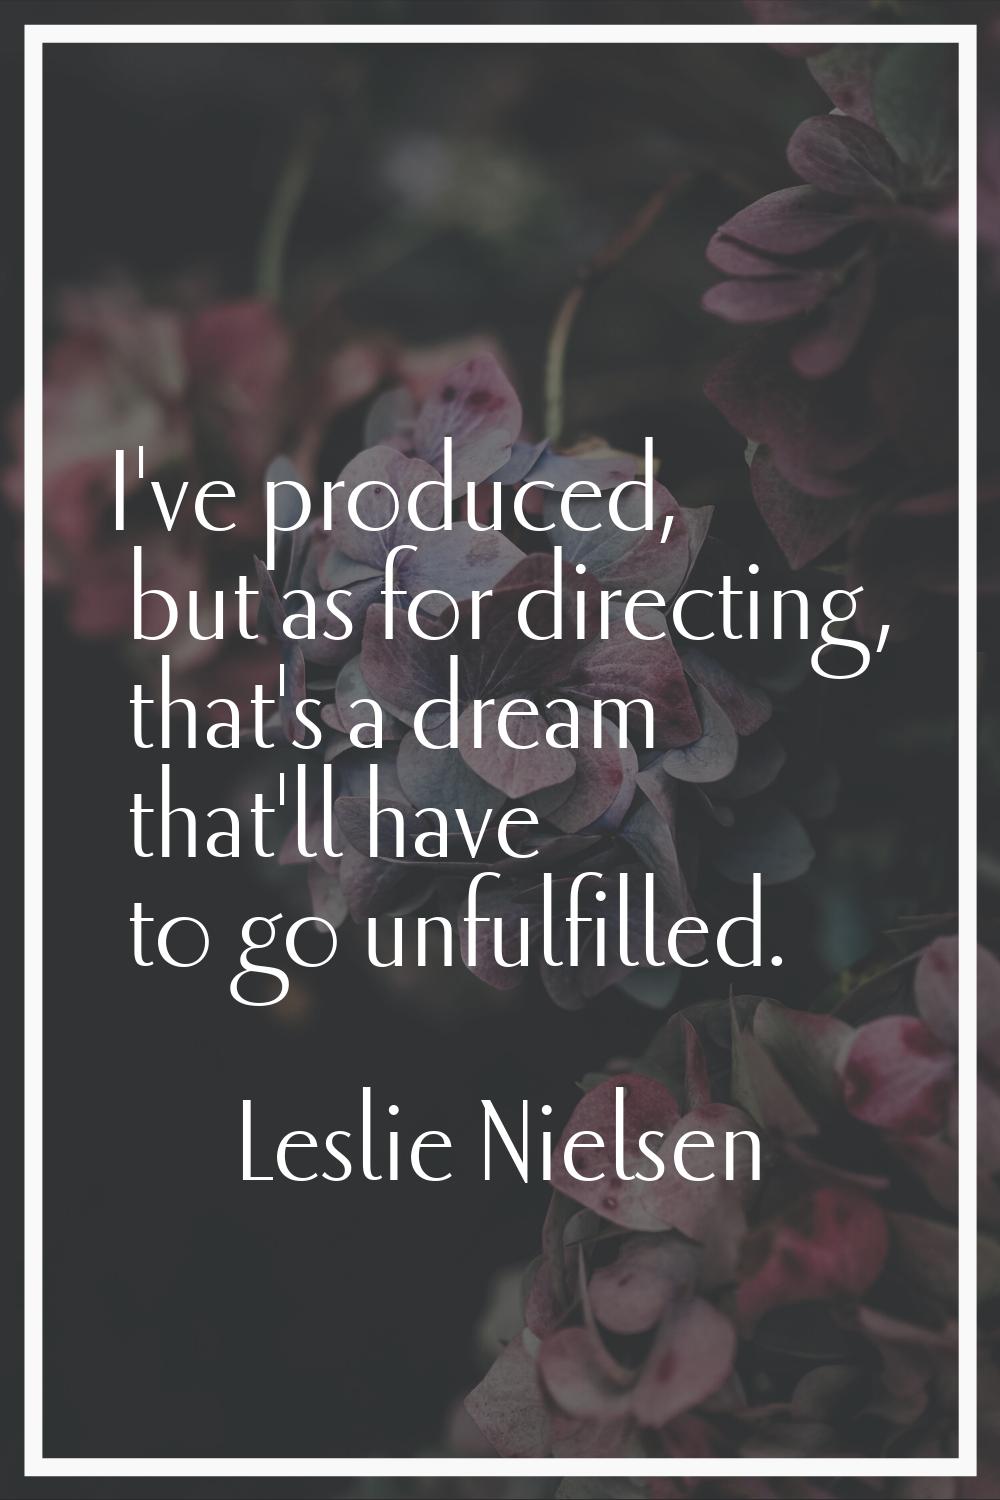 I've produced, but as for directing, that's a dream that'll have to go unfulfilled.